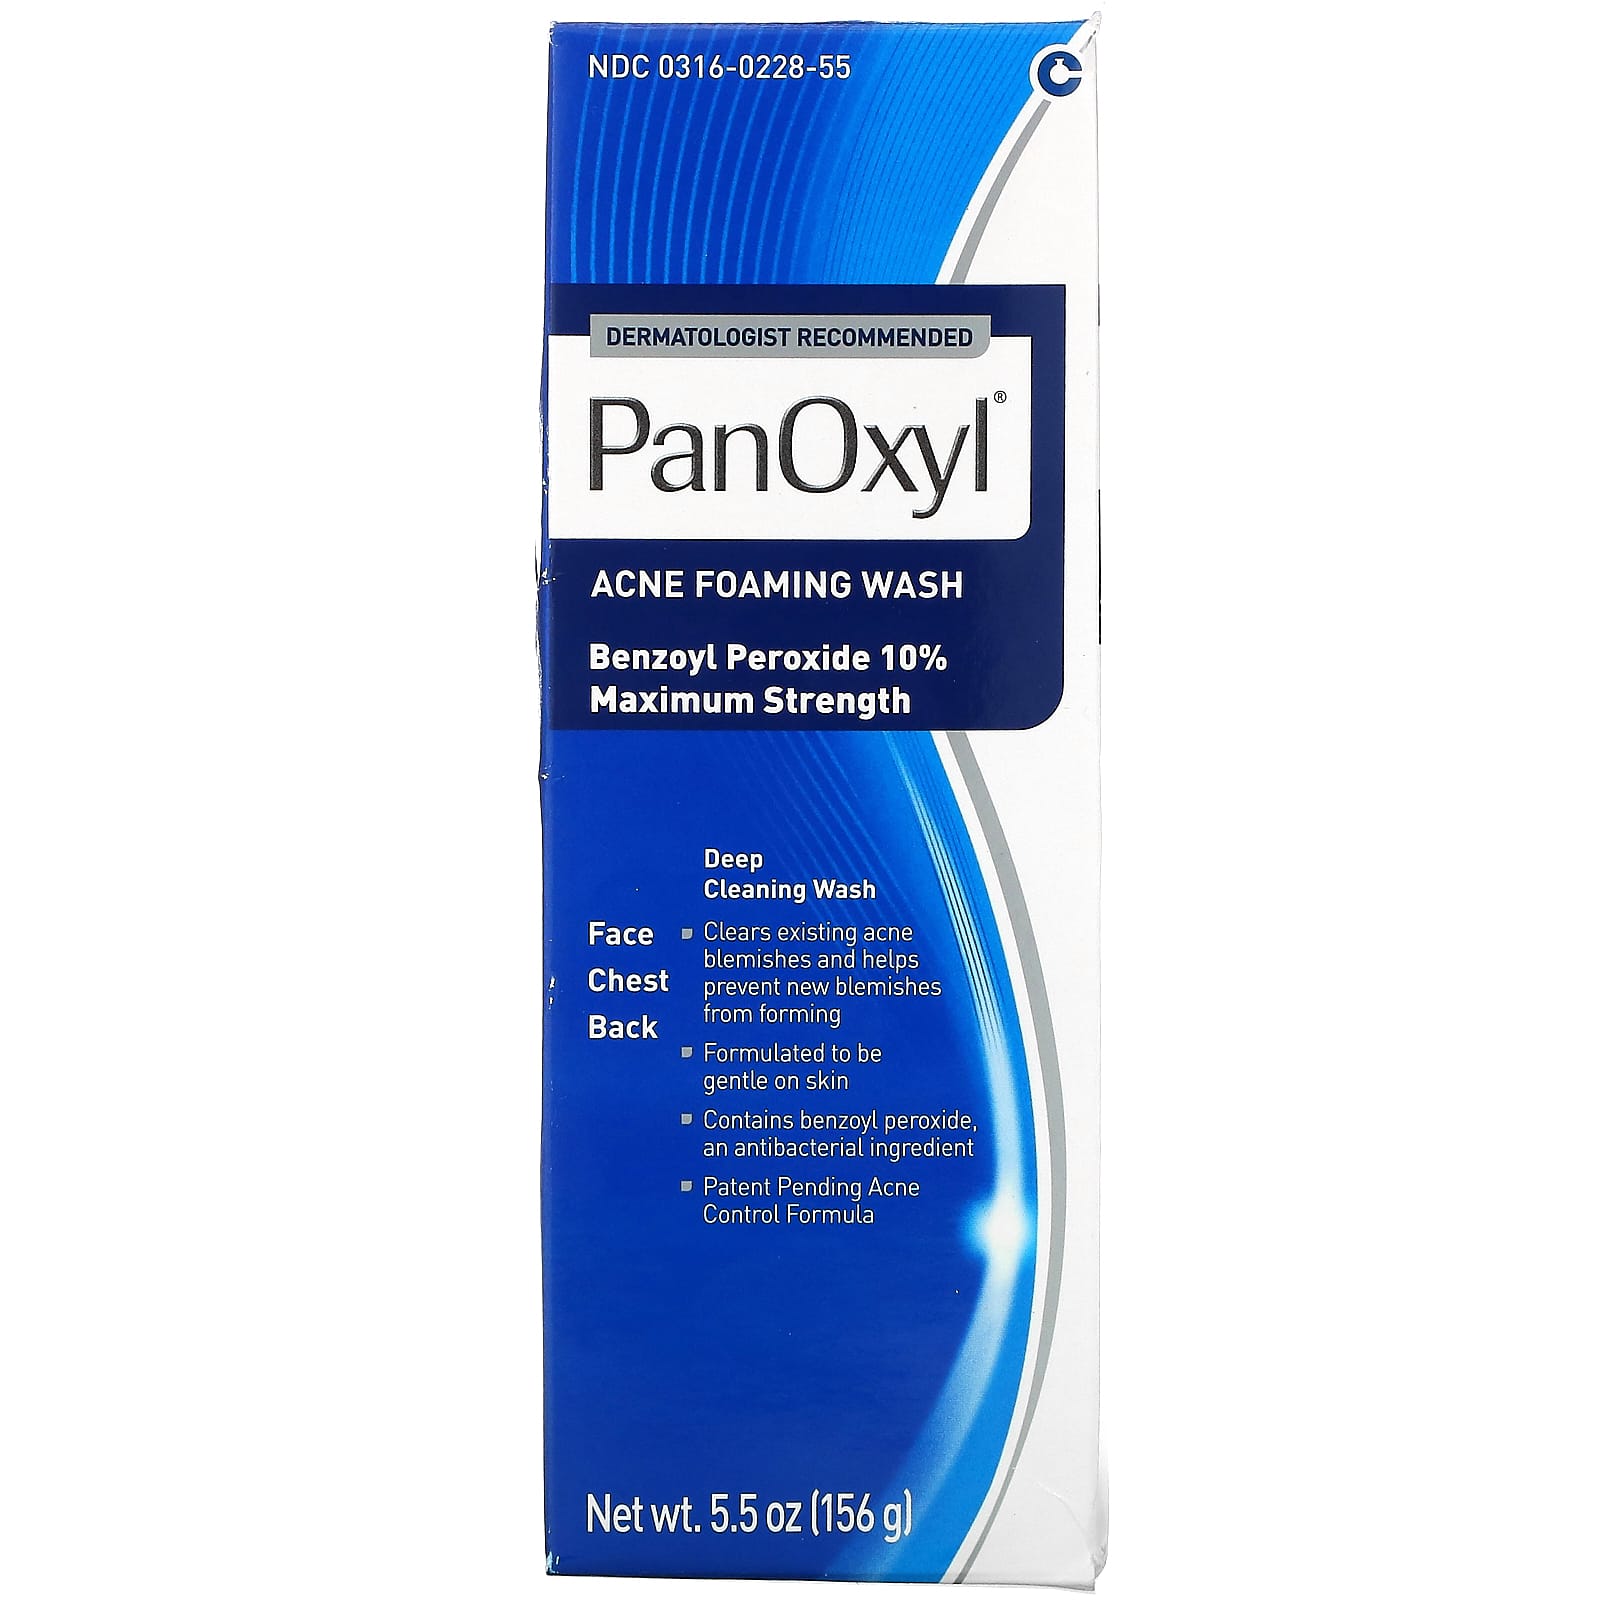 Panoxyl acne foaming wash cleanser for body, chest and face